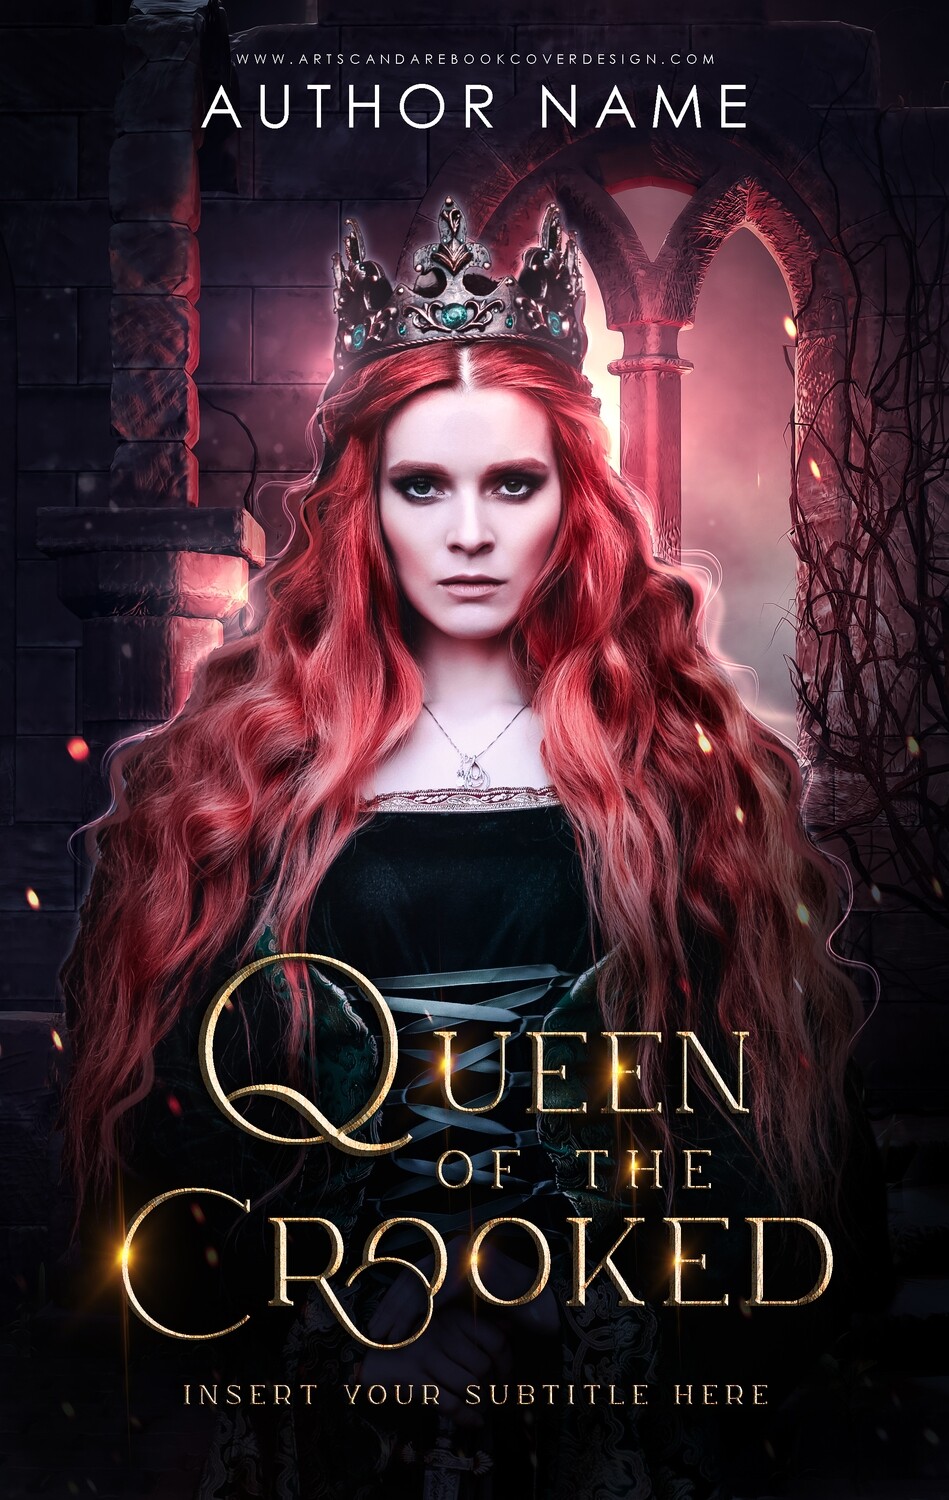 Ebook: Queen of the Crooked